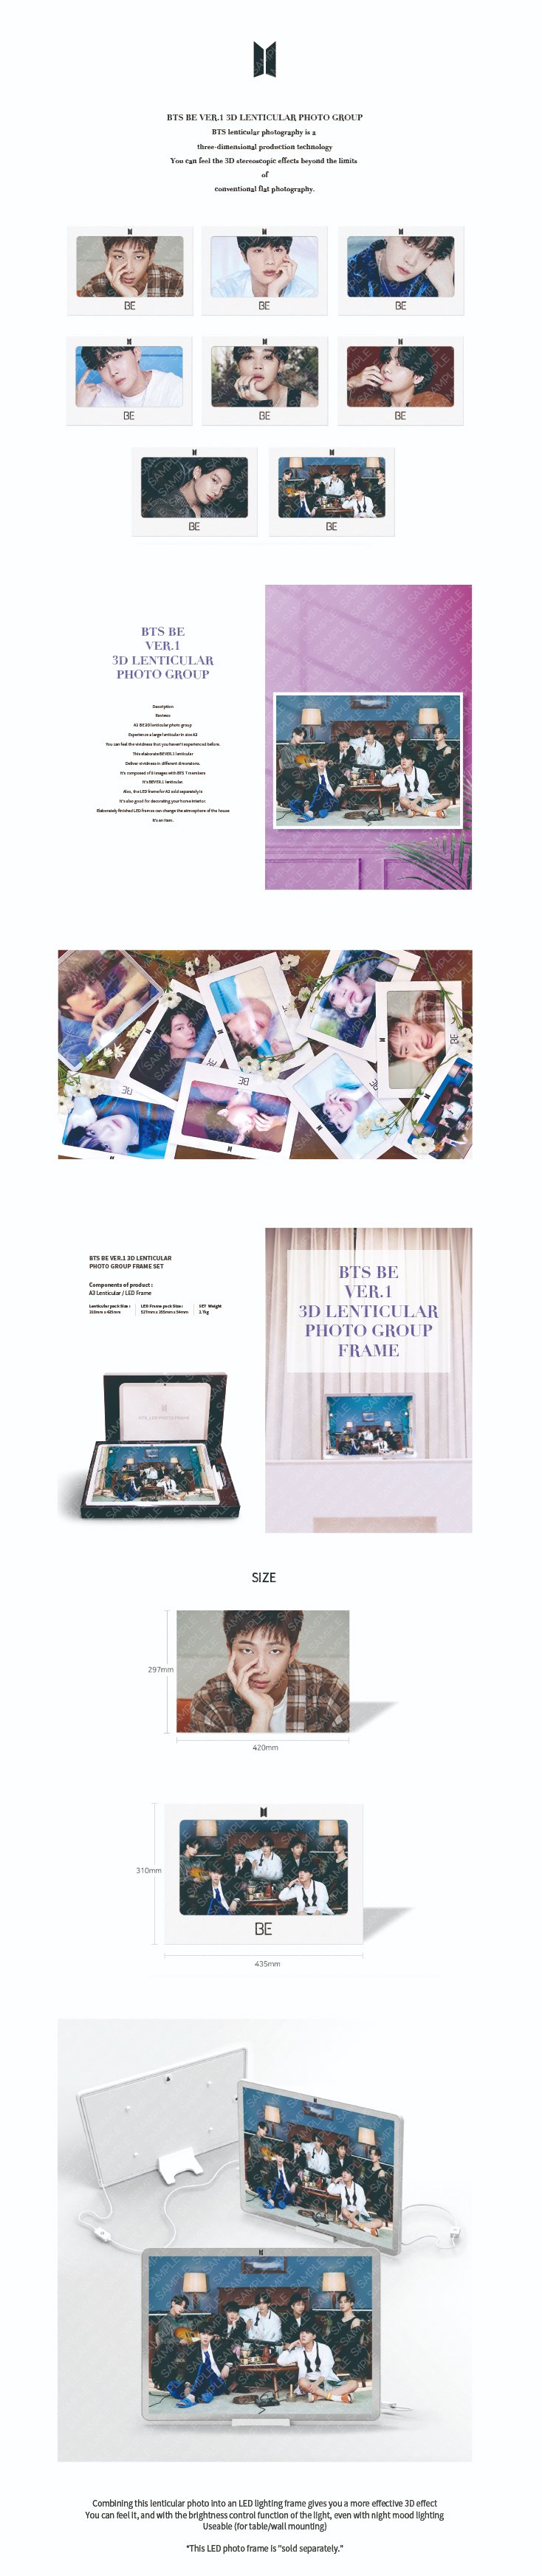 A3 SIZE BTS BE 3D LENTICULAR_SUGA